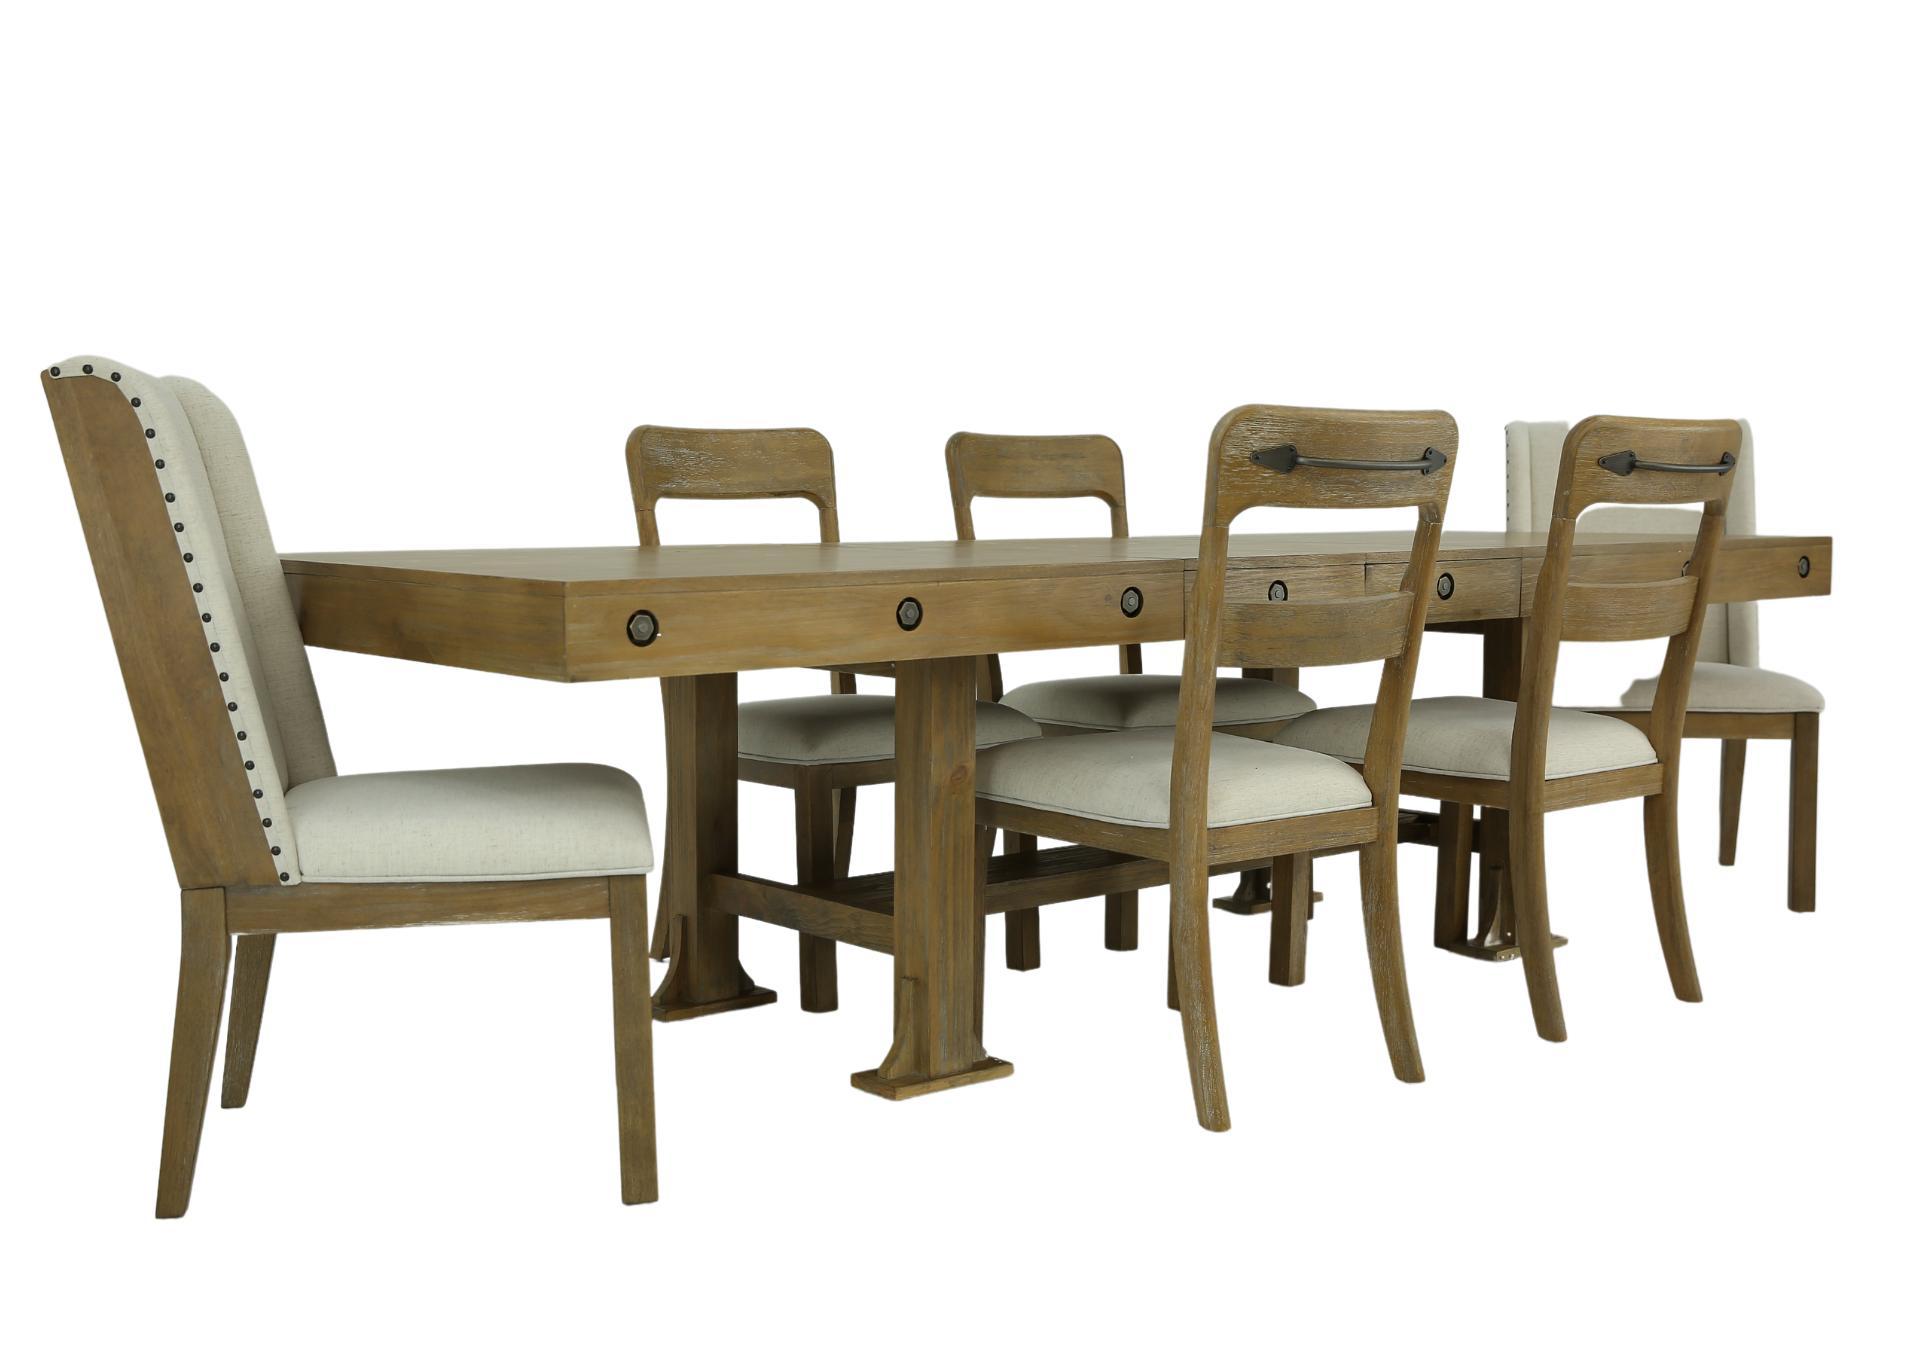 LYNNFIELD 7 PIECE DINING SET,MAGS